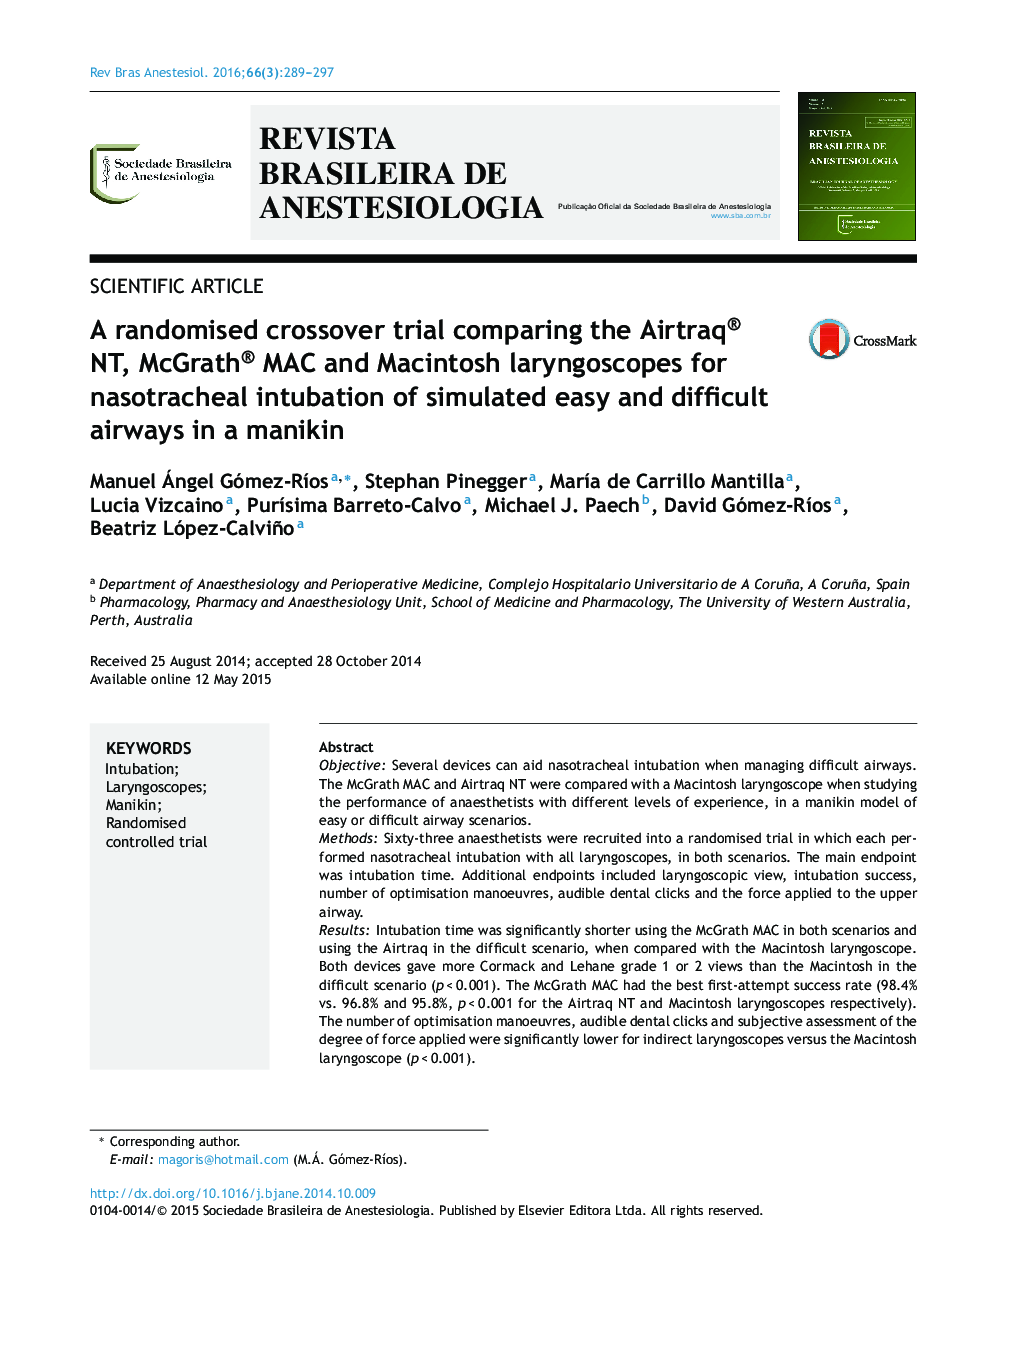 A randomised crossover trial comparing the Airtraq® NT, McGrath® MAC and Macintosh laryngoscopes for nasotracheal intubation of simulated easy and difficult airways in a manikin